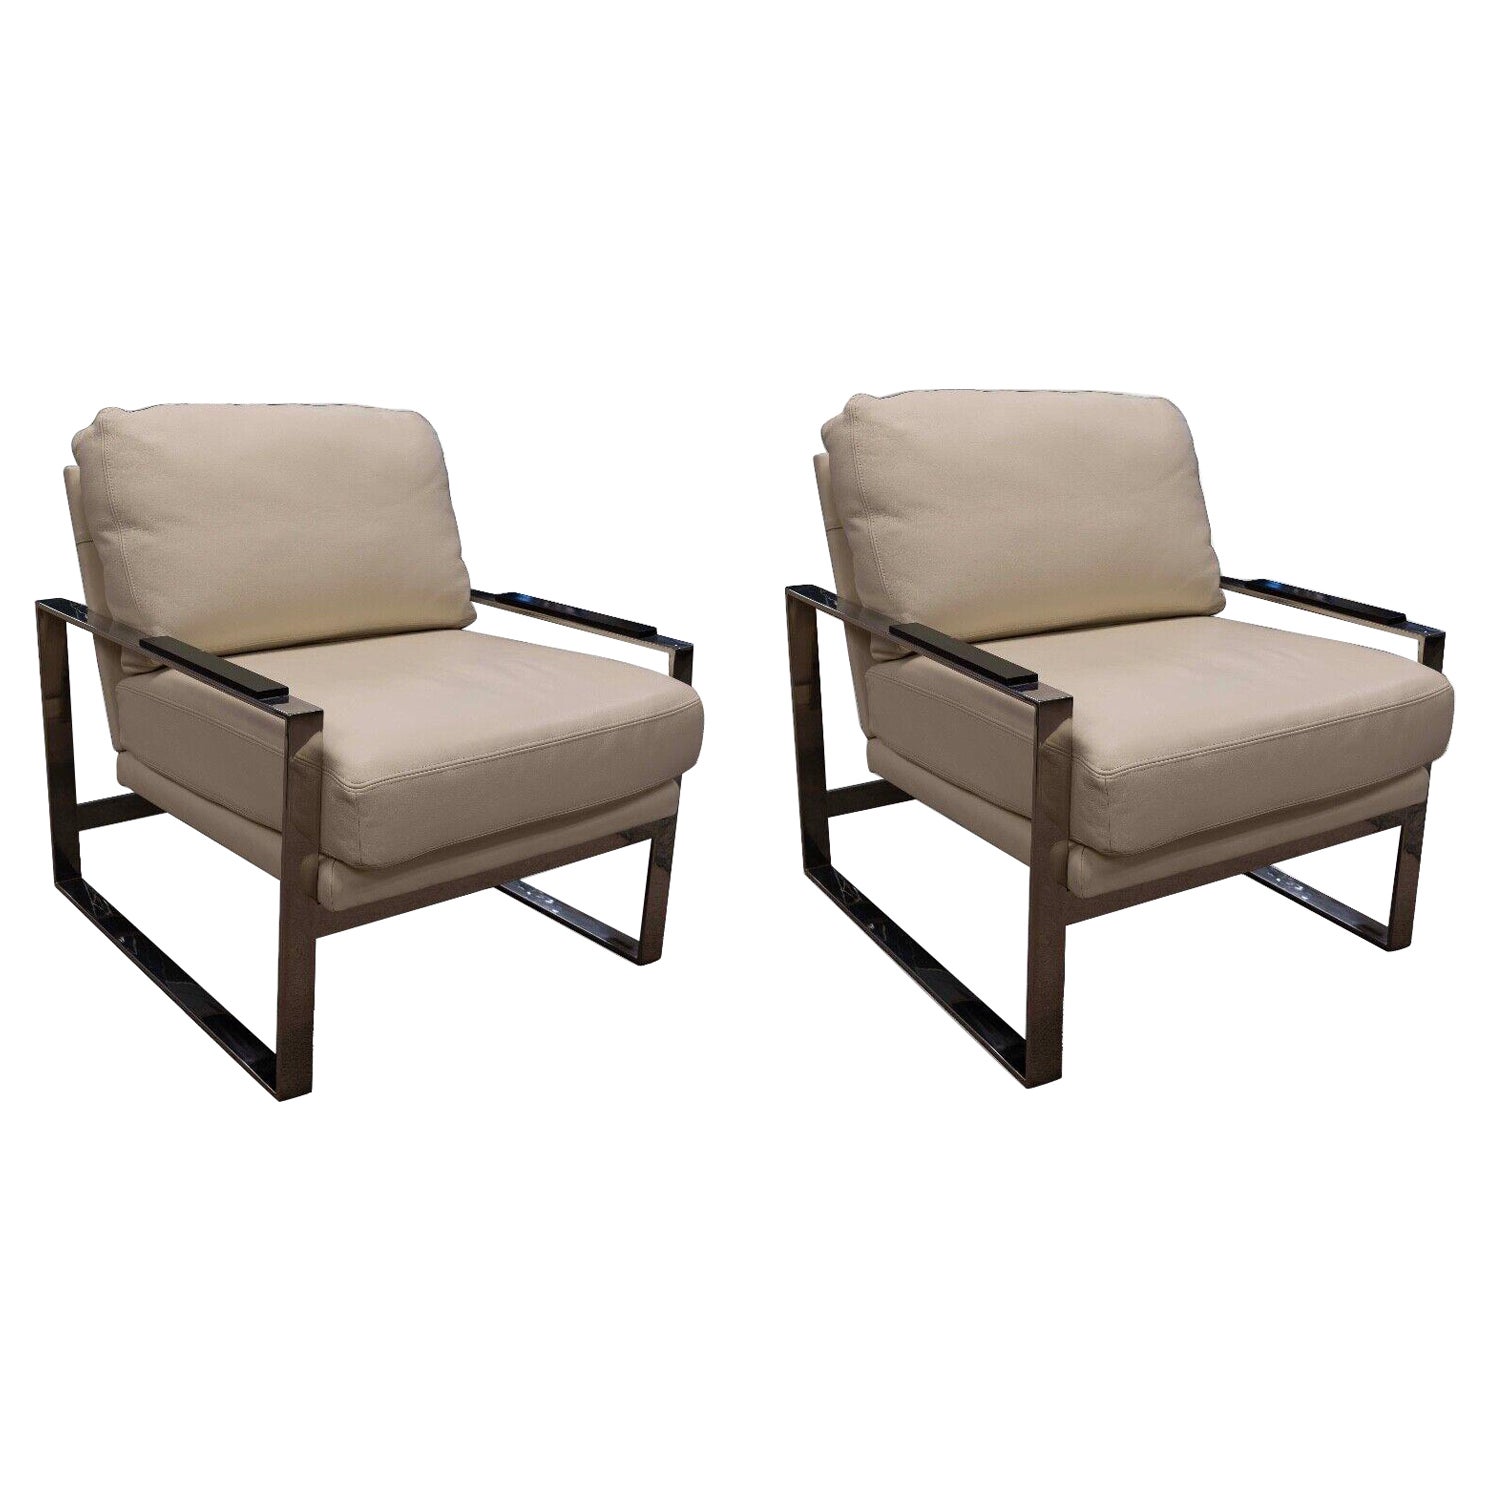 Pair of Chairs for Modernism Michael Weiss Collection Vanguard Furniture For Sale